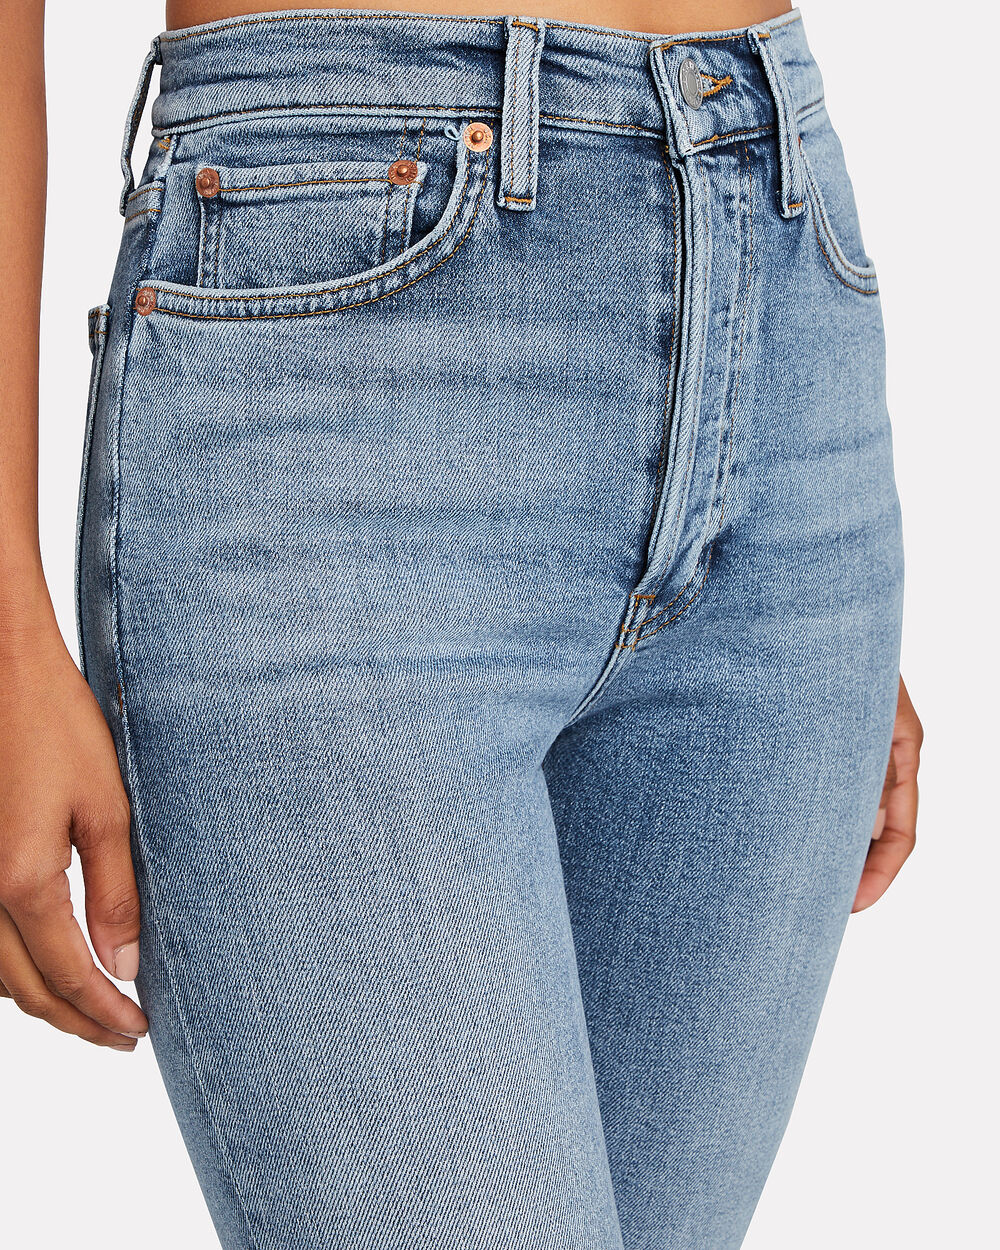 RE/DONE Jeans  Comfort Stretch High Rise Ankle Crop in Mid 90s